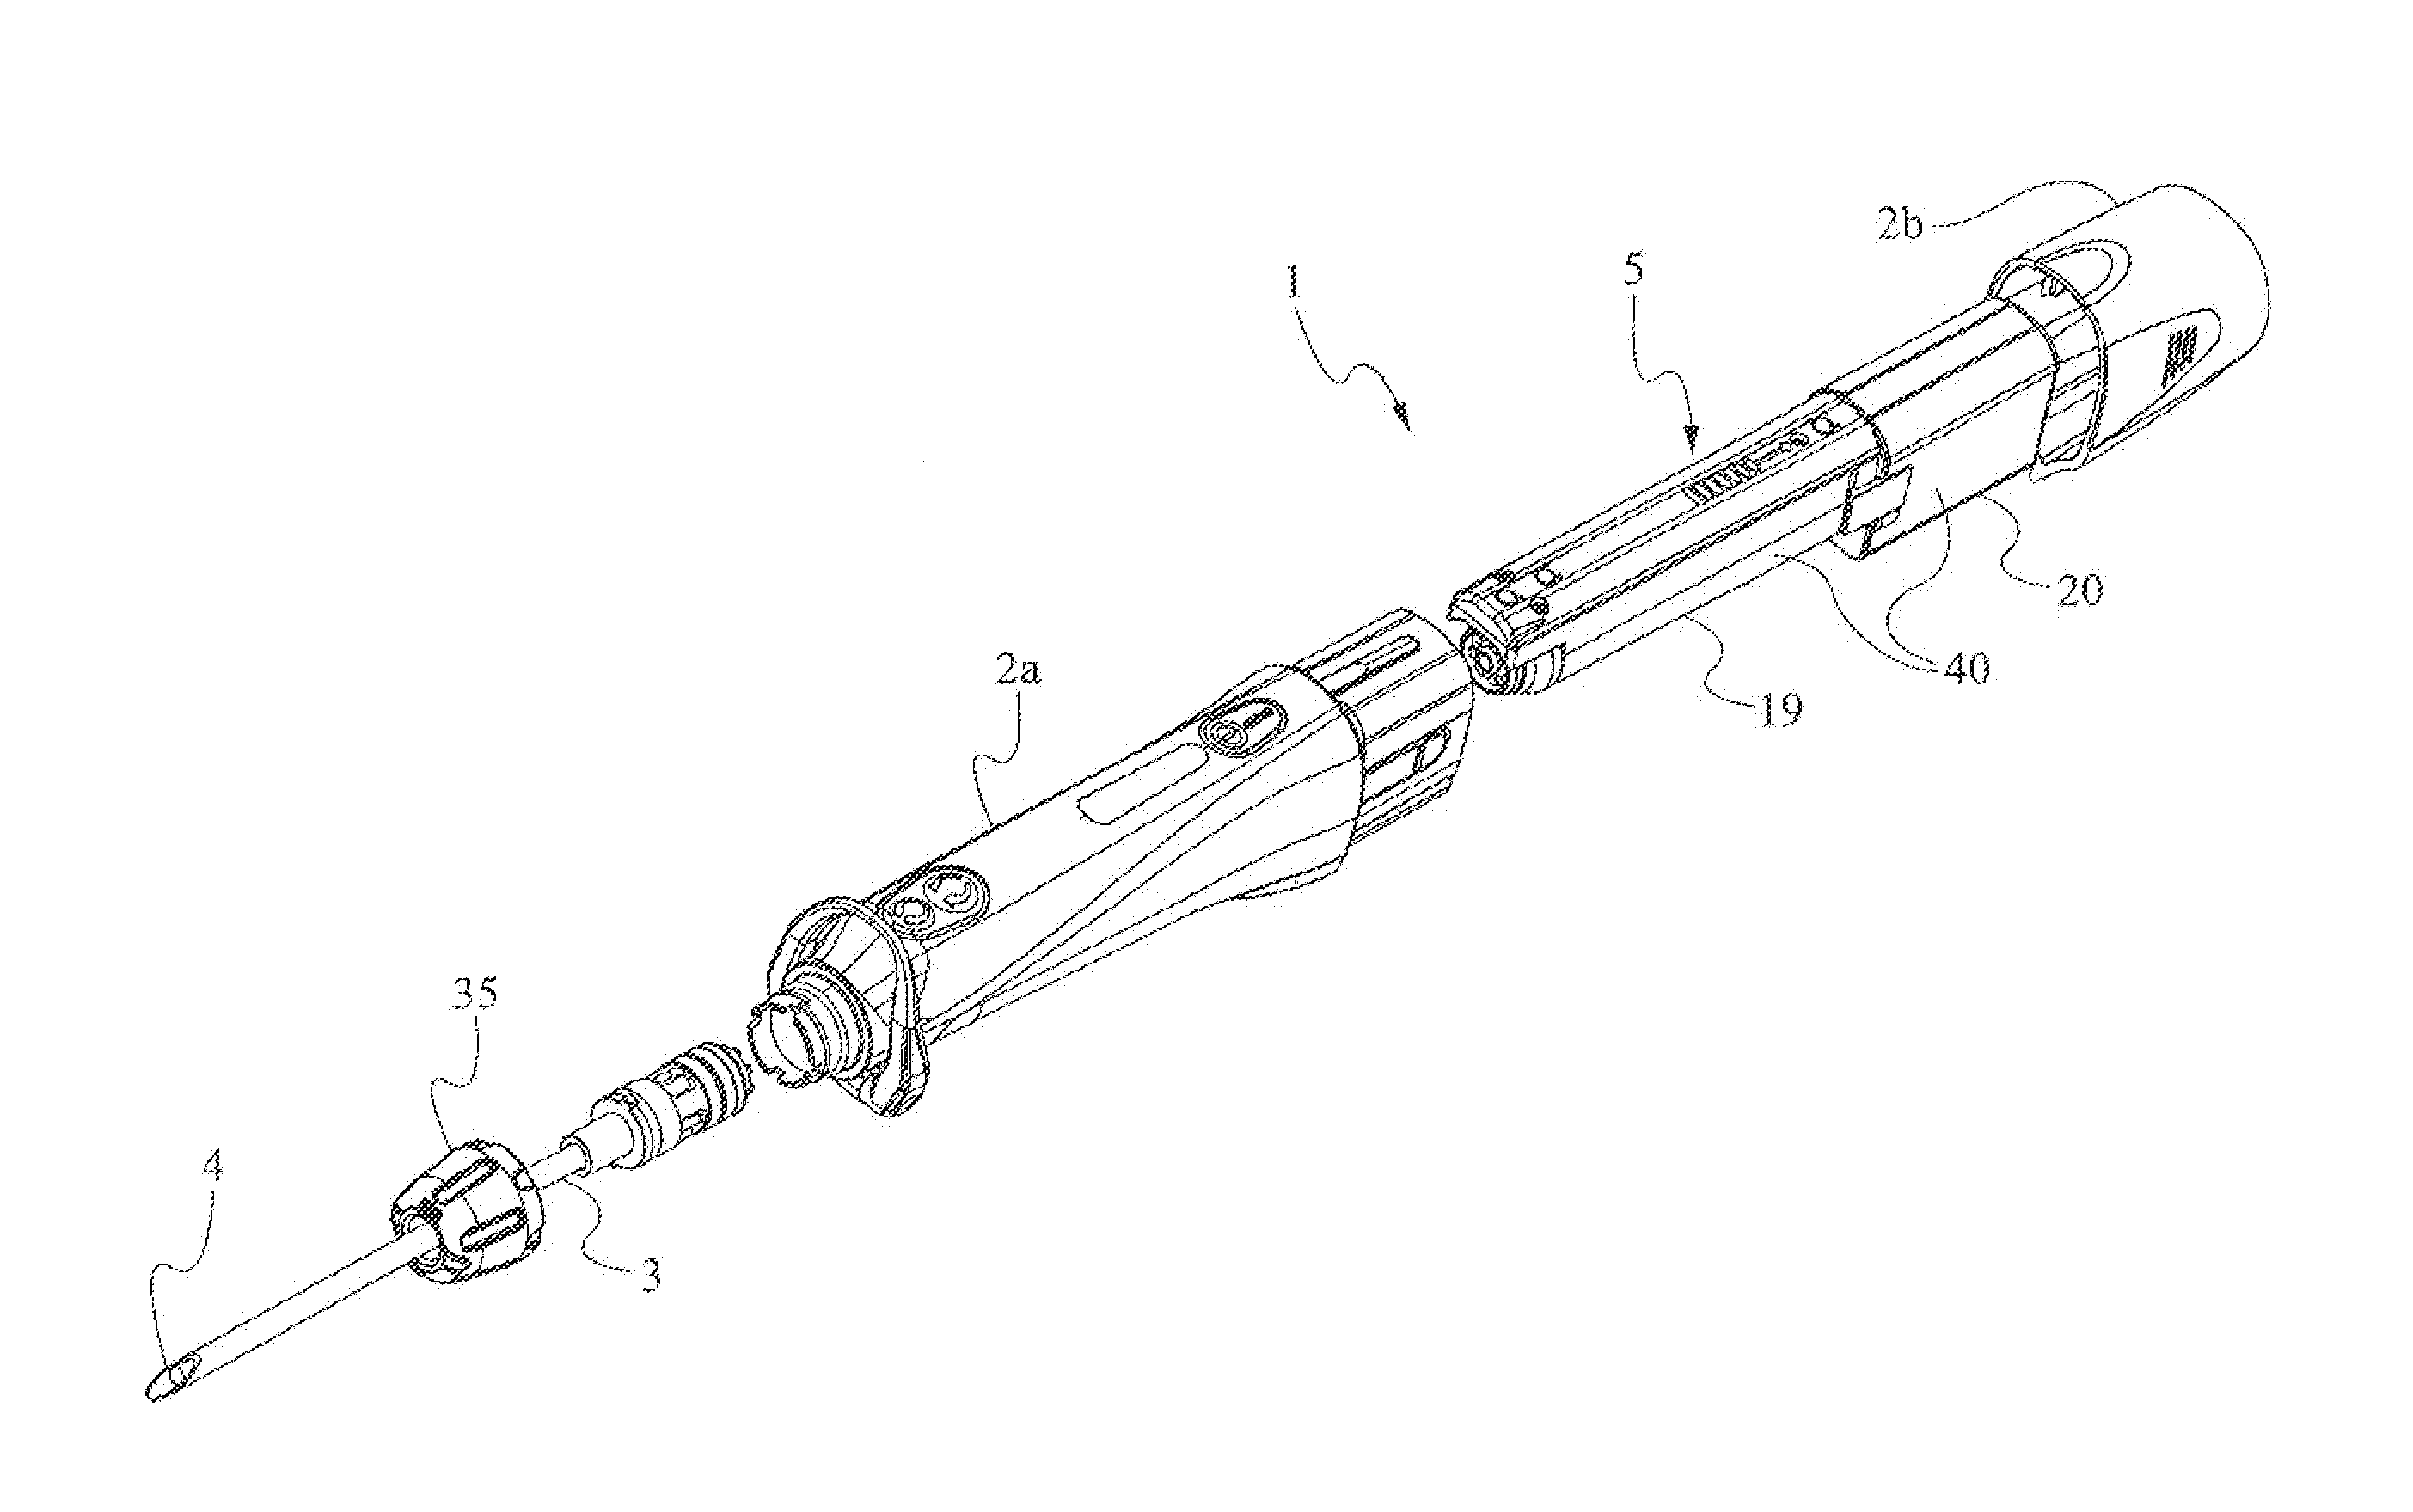 Device for treatments with endoscopic resection/removal of tissues